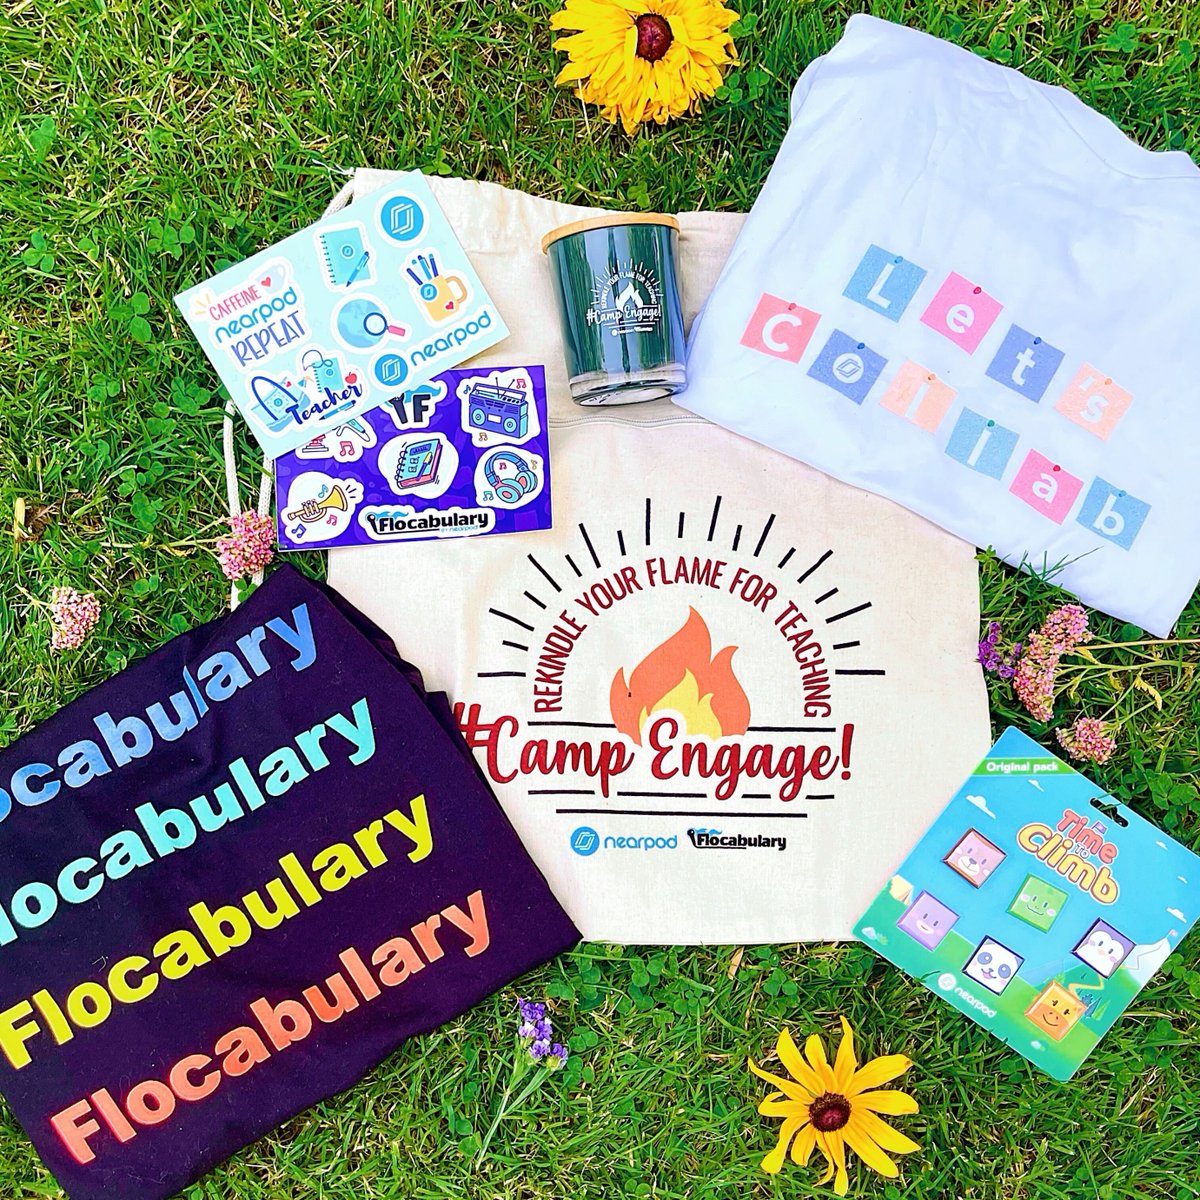 ✨ GIVEAWAY TIME! ✨ #CampEngage returns next week with FREE PD! 🎉 Save your spot: bit.ly/3of931D To celebrate, we’re randomly selecting some of you to win limited-edition camp swag! 👕💙 To enter: ⭐️ RT & reply below with what you're most excited for at #CampEngage!